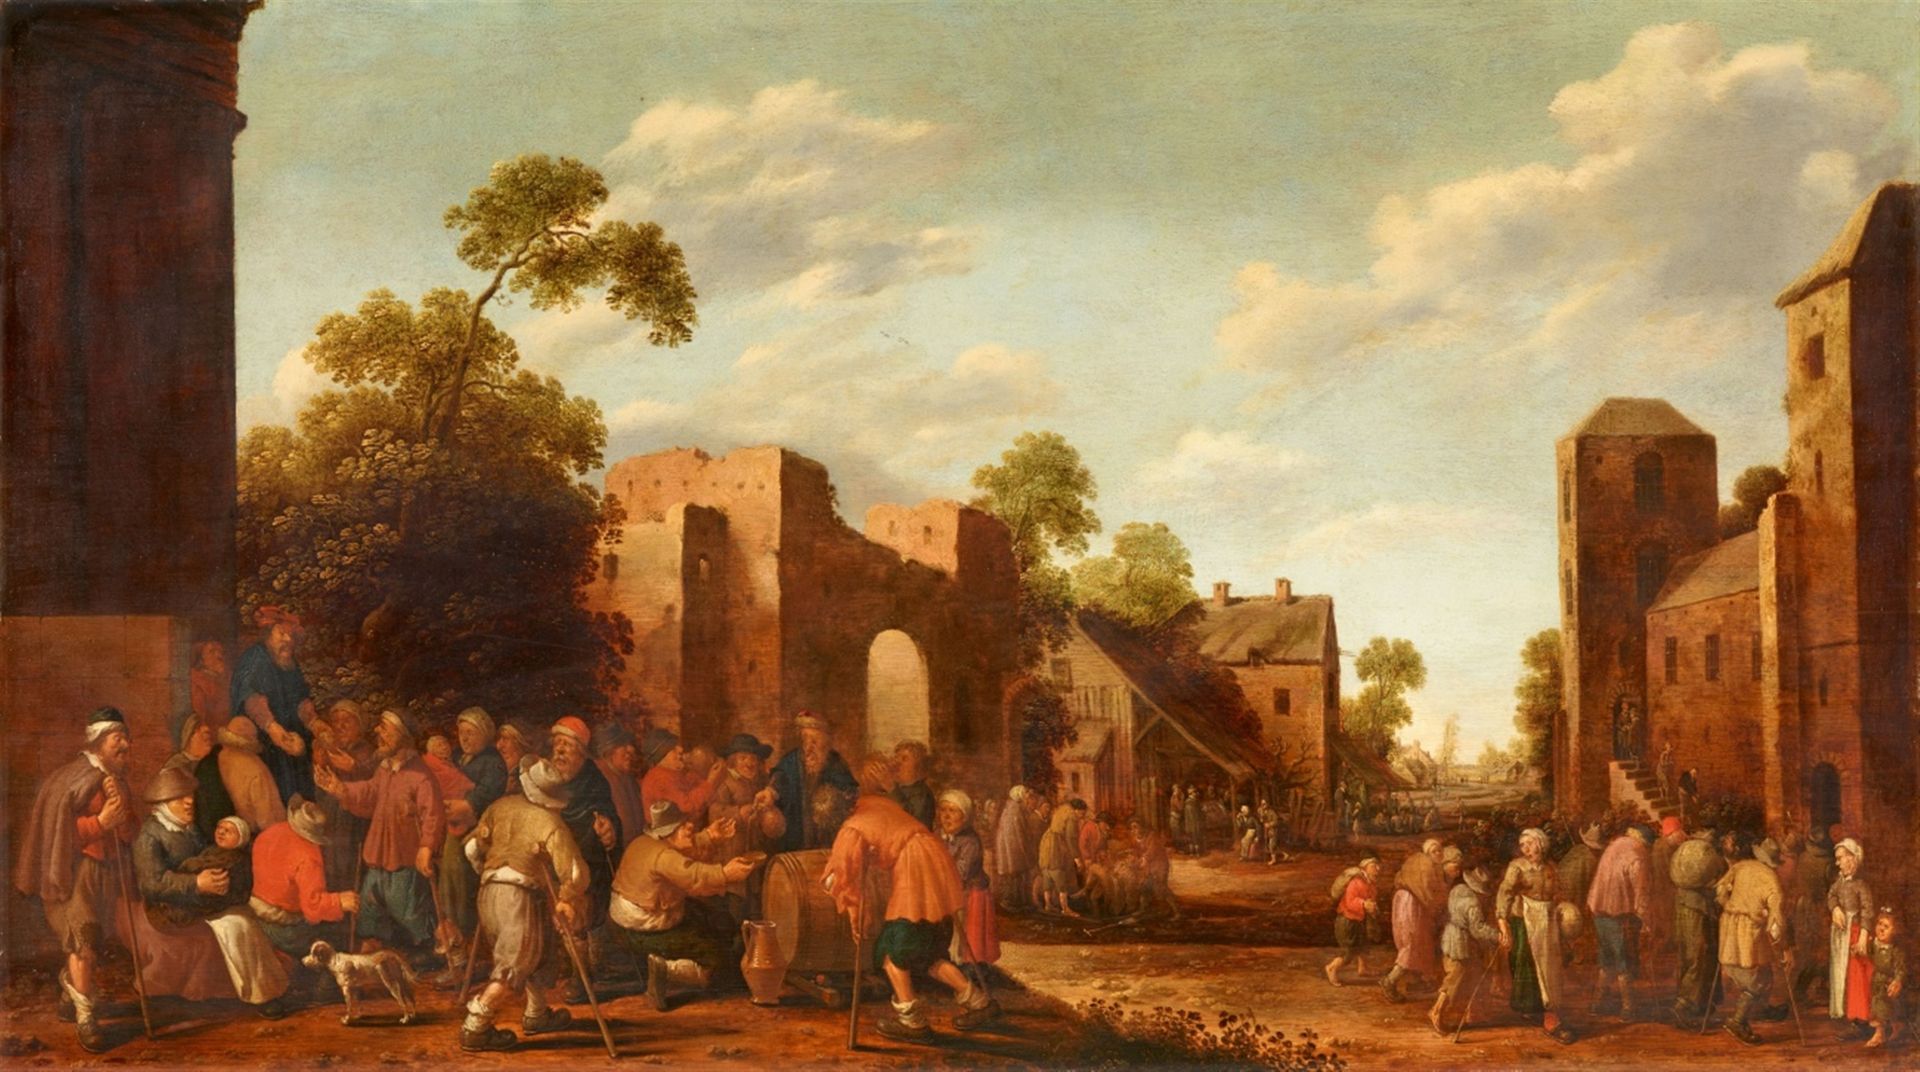 Joost Cornelisz. Droochsloot<BR>Village Scene with the Seven Acts of Mercy